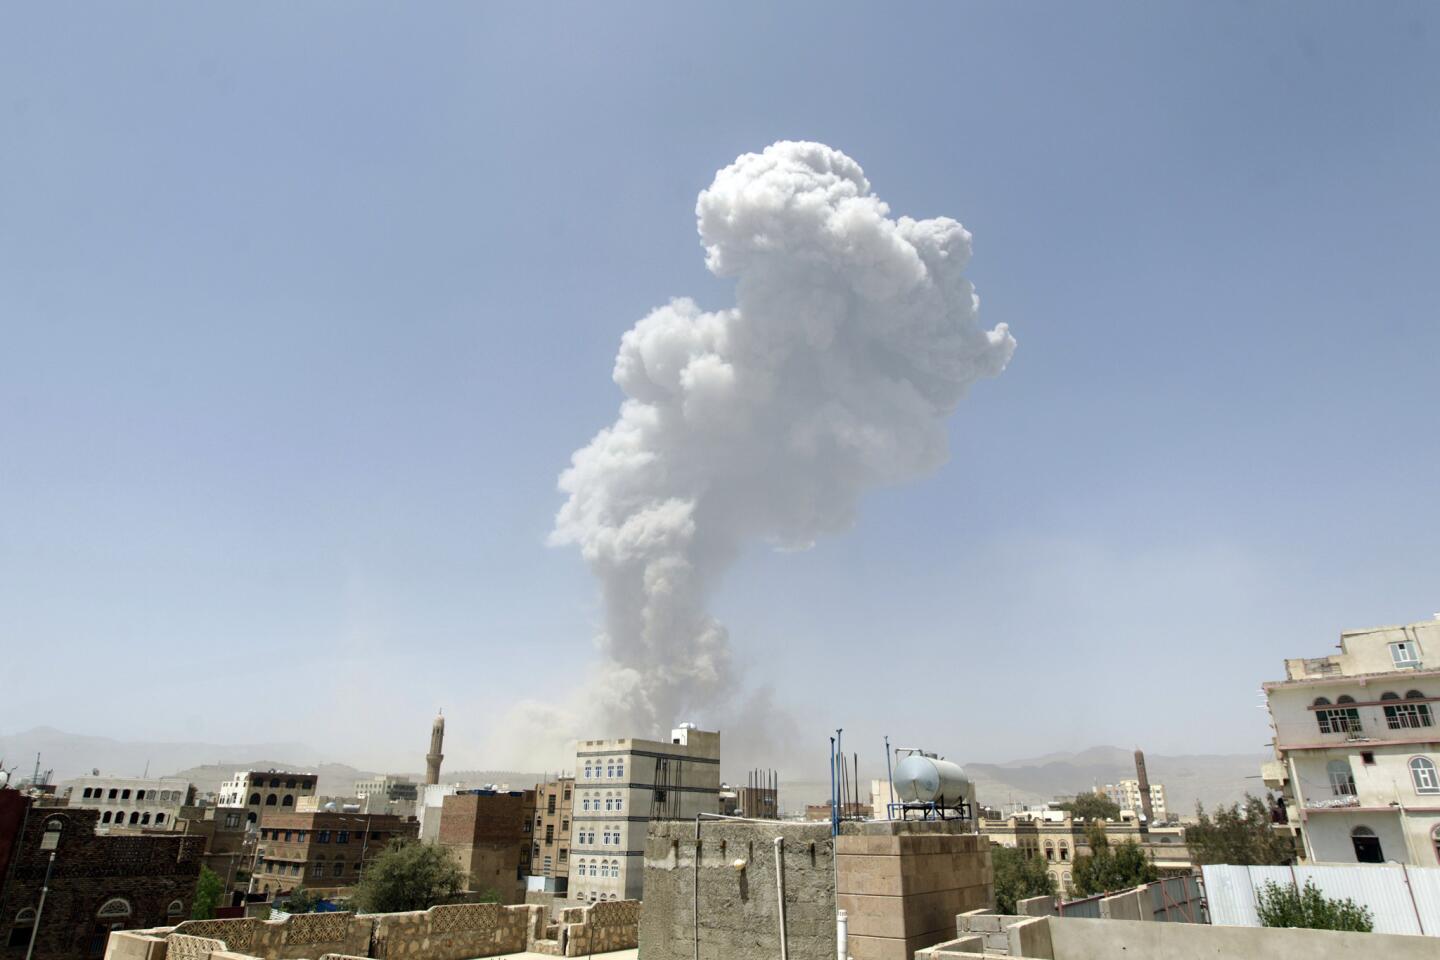 Smoke billows from the Faj Attan Hill after a reported airstrike by the Saudi-led coalition on an army arms depot, now under Huthi rebel control, on April 20, 2015, in Sanaa, Yemen.